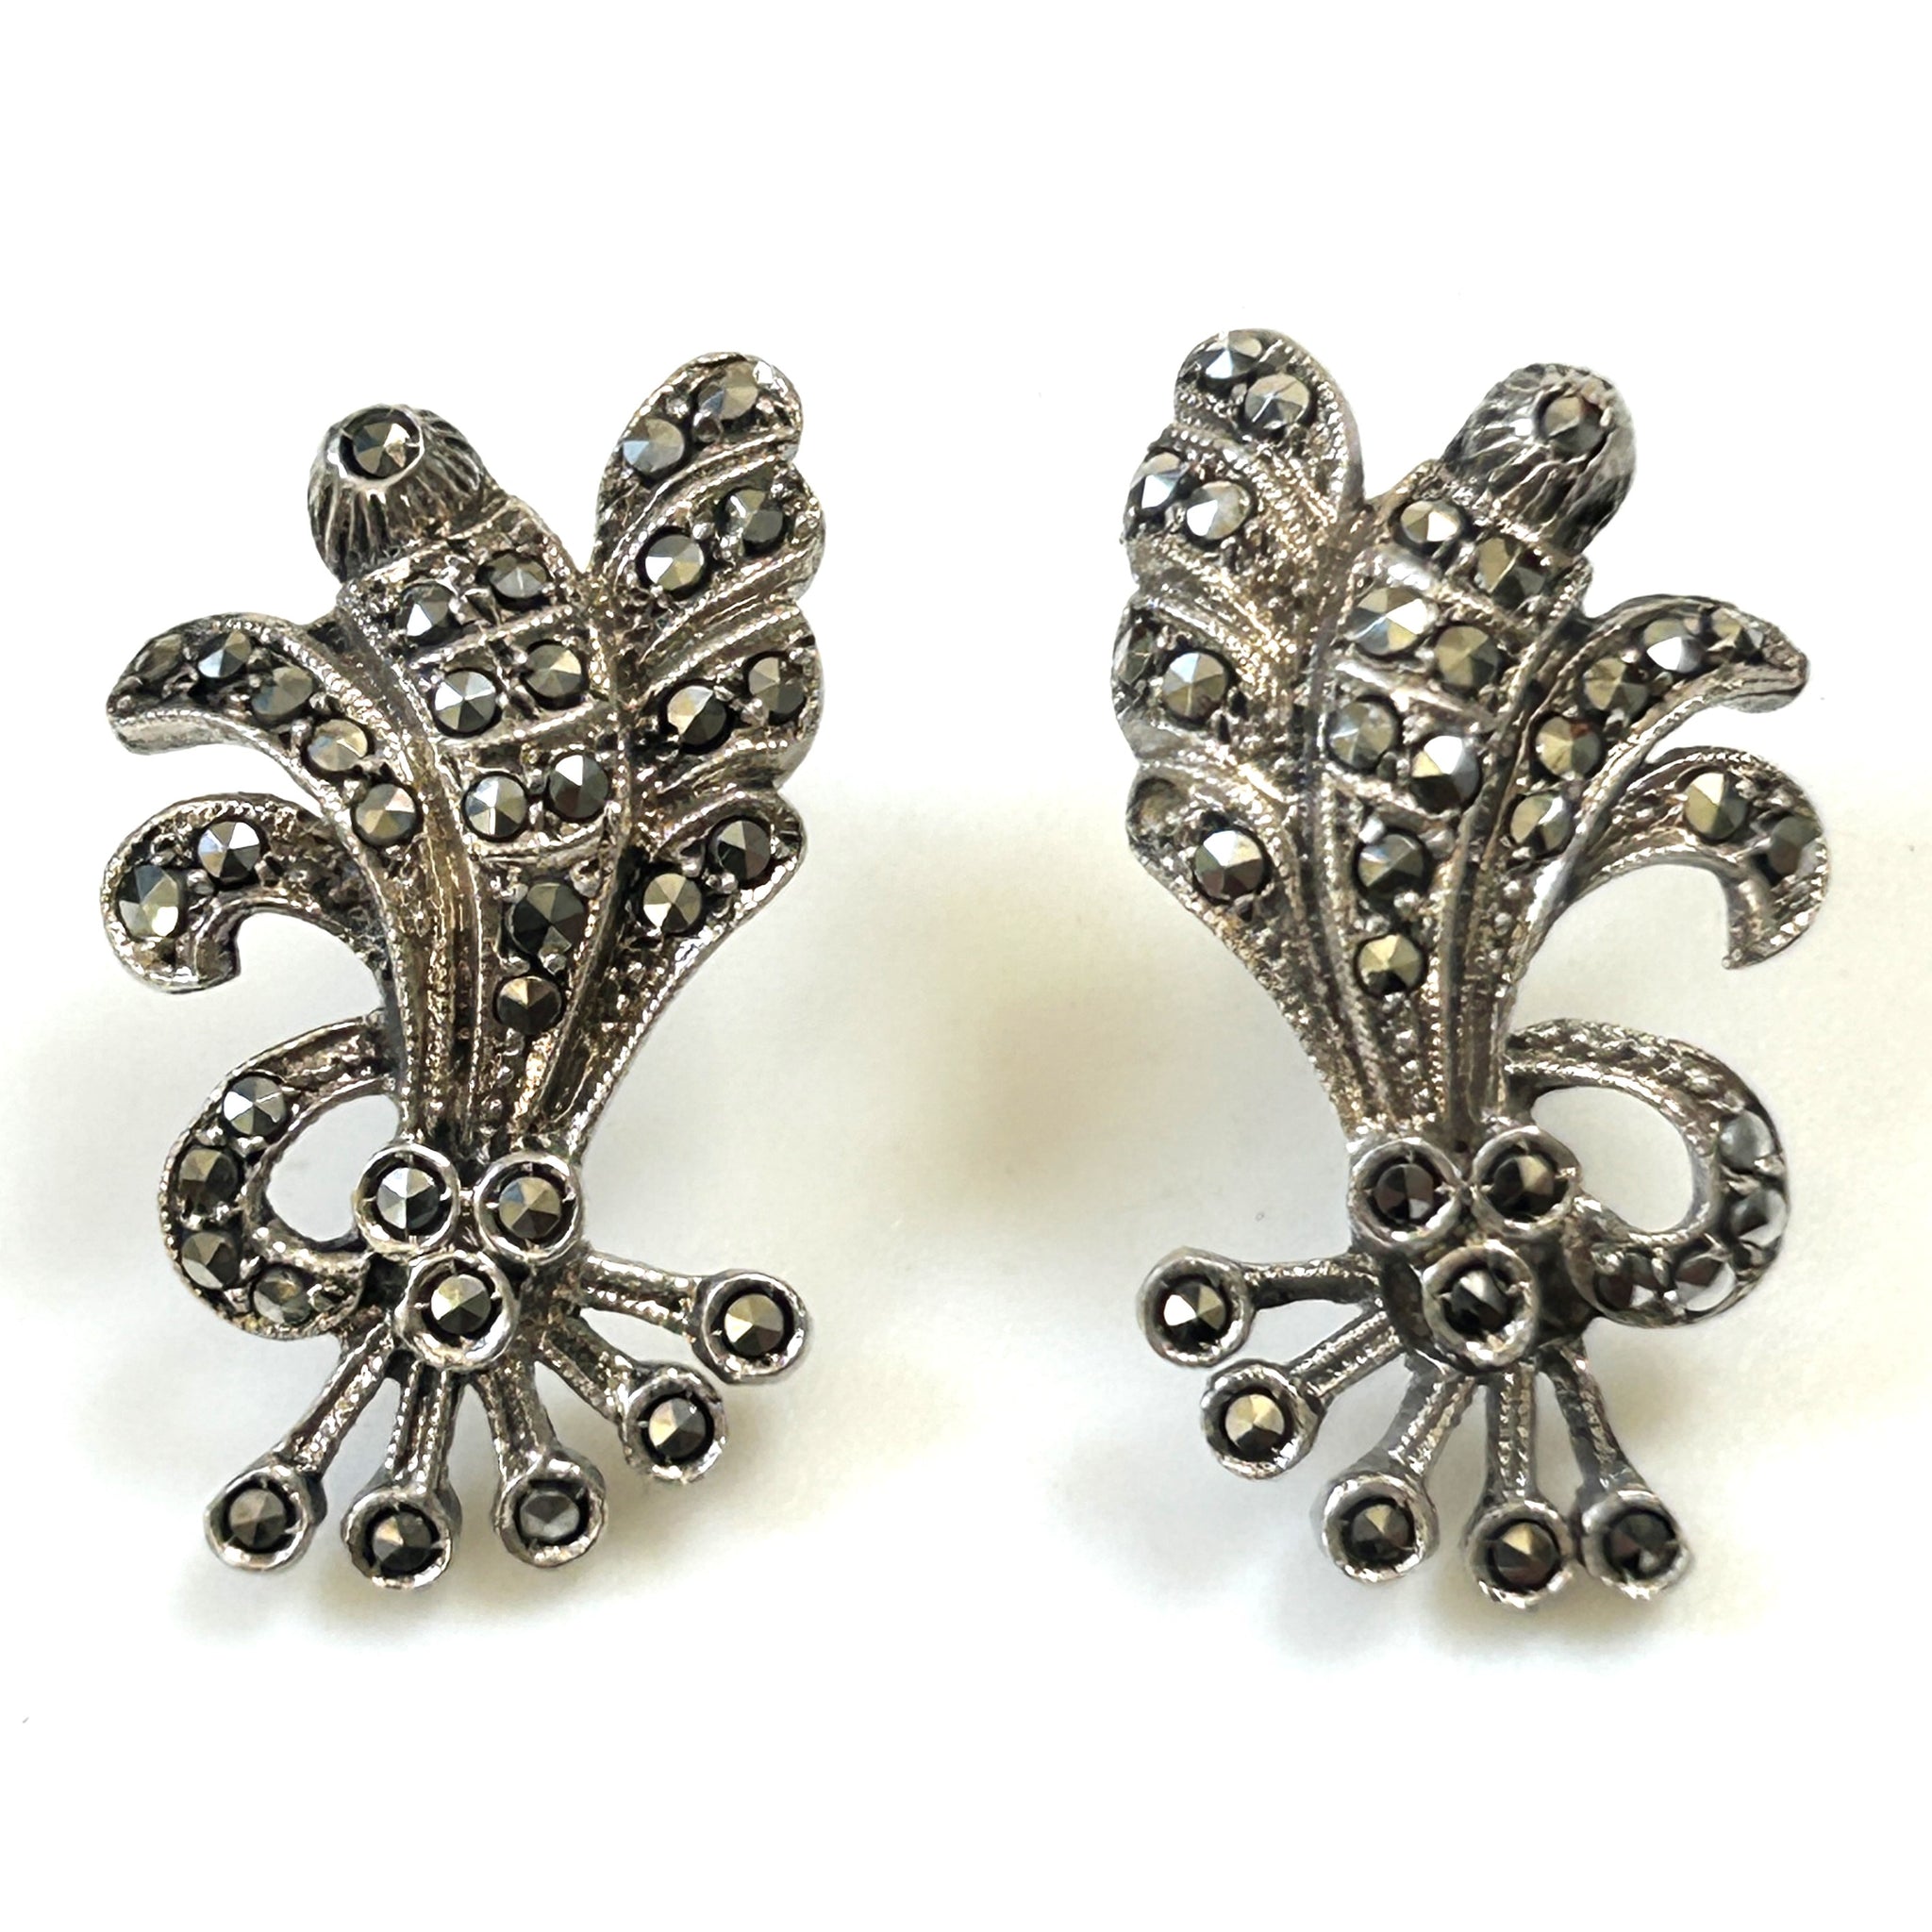 Silver and Marcasite Screw-on Earrings